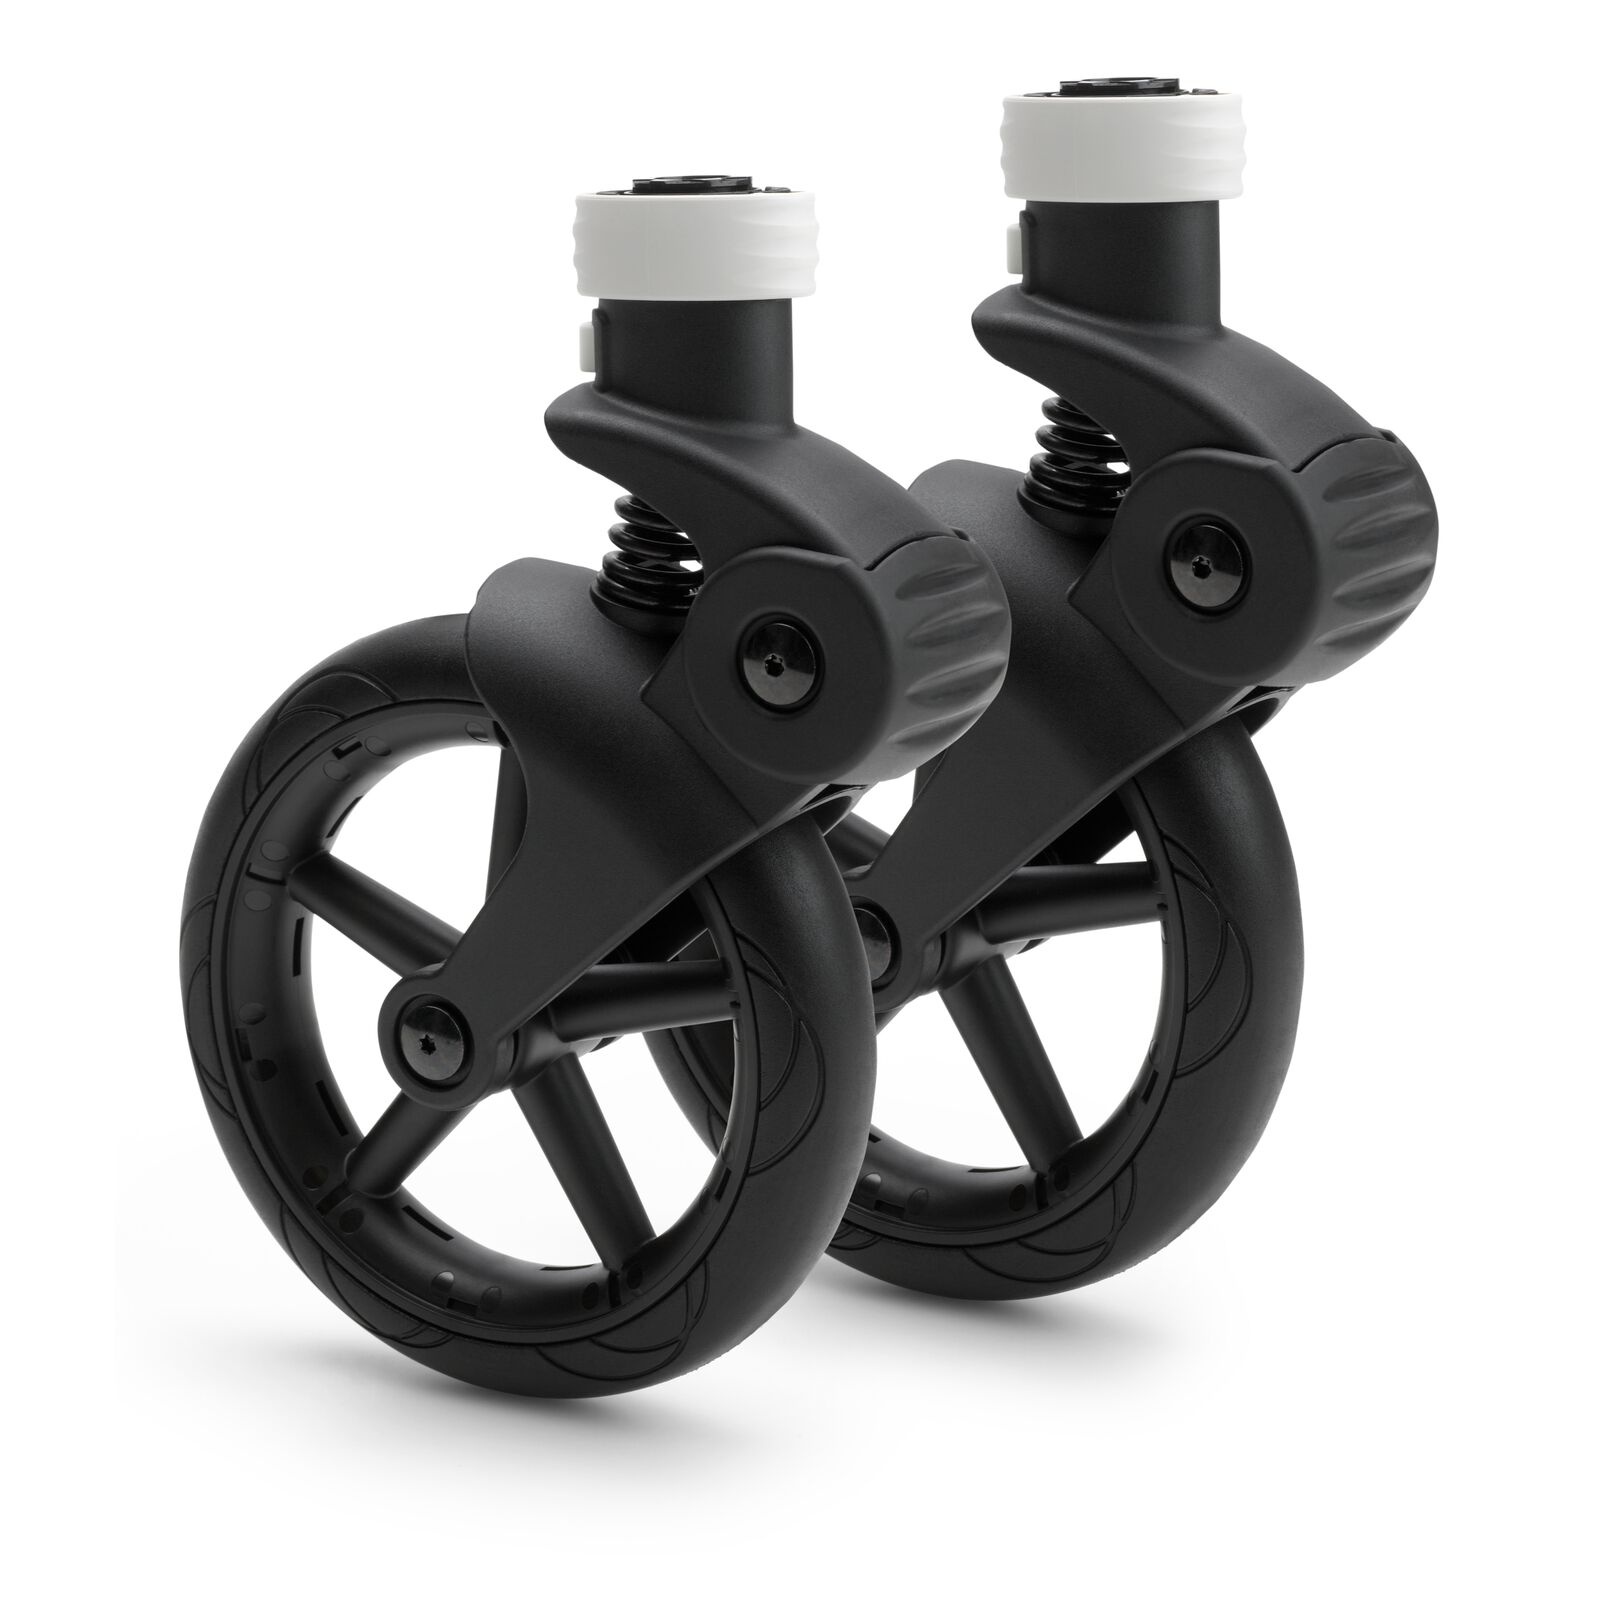 Bugaboo Bee 6 swivel wheels replacement set - View 1